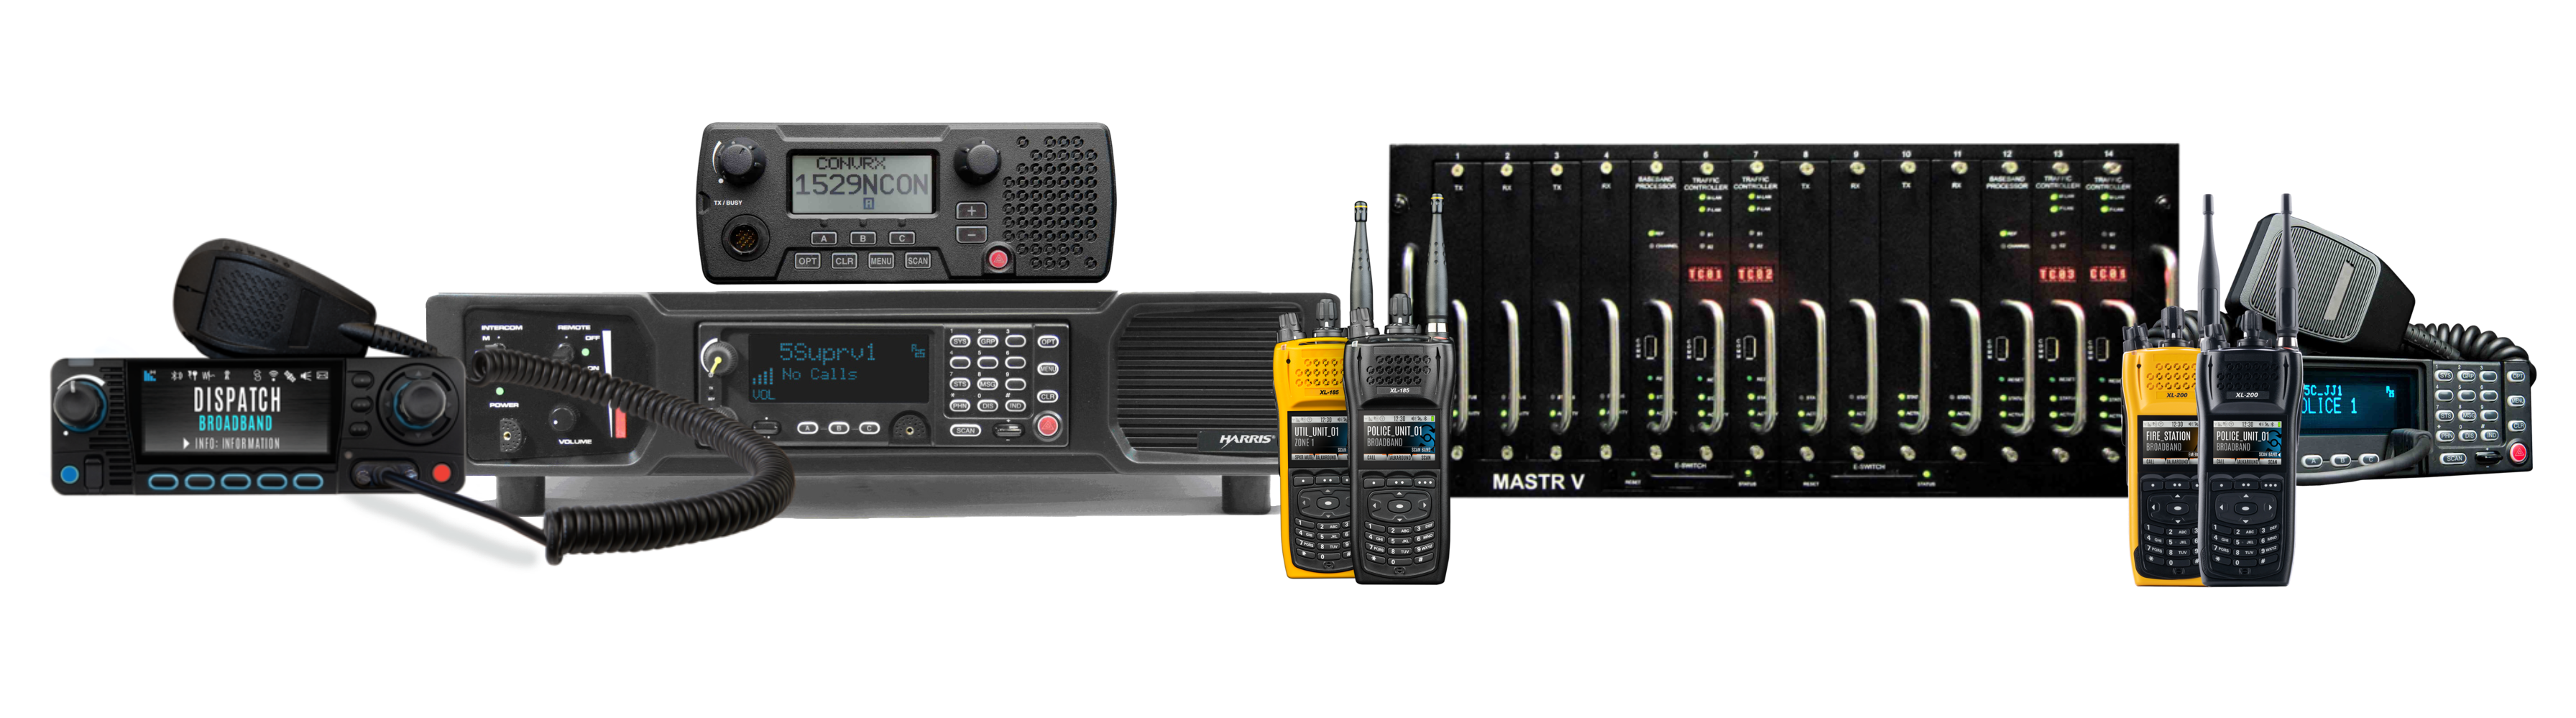 Assortment of Portable, Mobile, and Base Station Radios from L3Harris